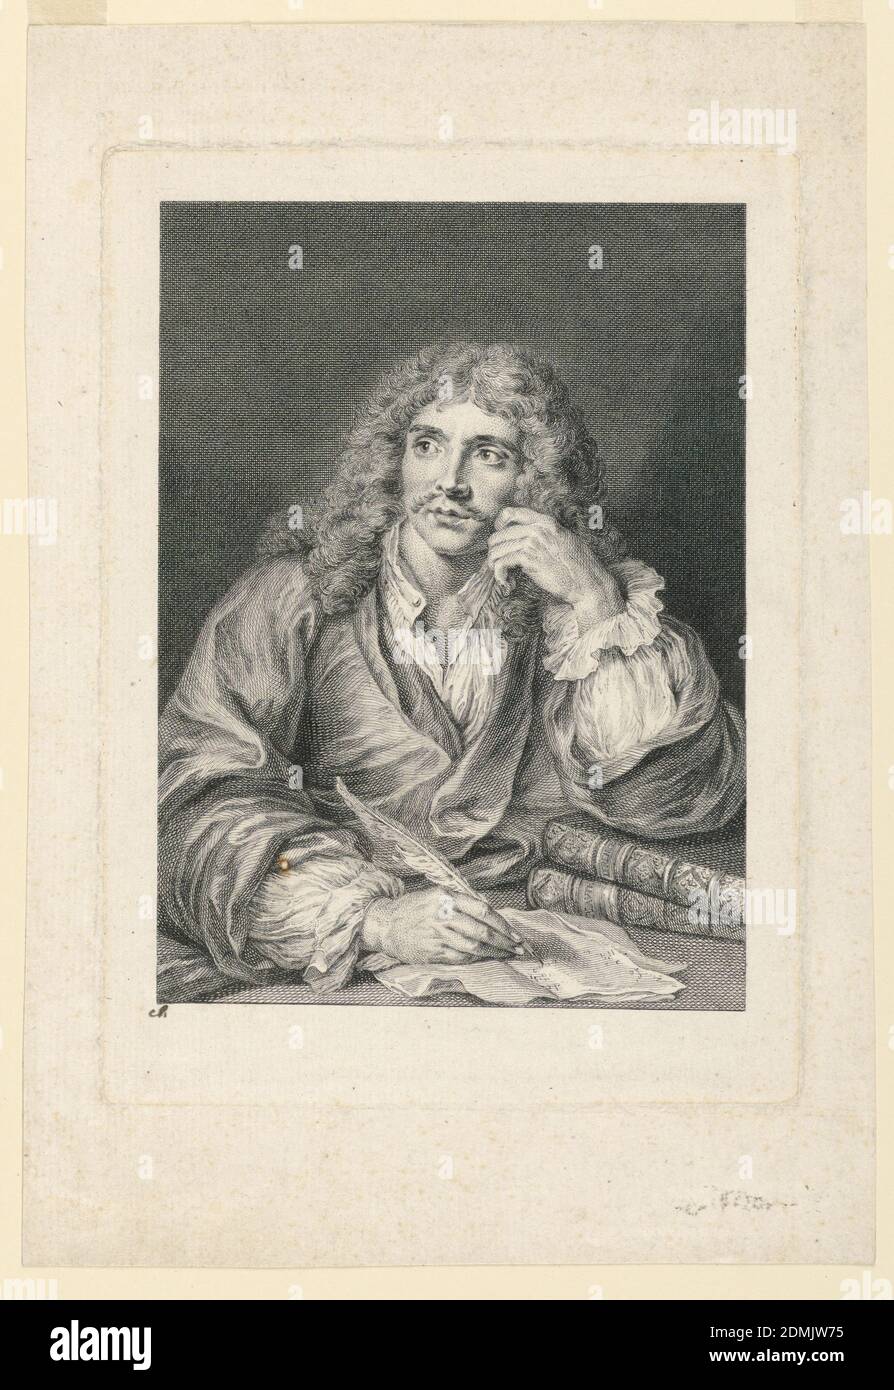 Portrait of Jean Baptiste Moliére (1620-1673), François Bernard Lépicié, French, 1698 - 1755, Charles-Antoine Coypel, French, 1694 – 1752, Engraving on paper, Moliére seated behind a table, his body and head slightly turned to left. His right hand, holding a pen, resting on writing paper. His head leans on his left hand. Books under his left elbow. He is wearing a dressing gown., France, 1734, Print Stock Photo